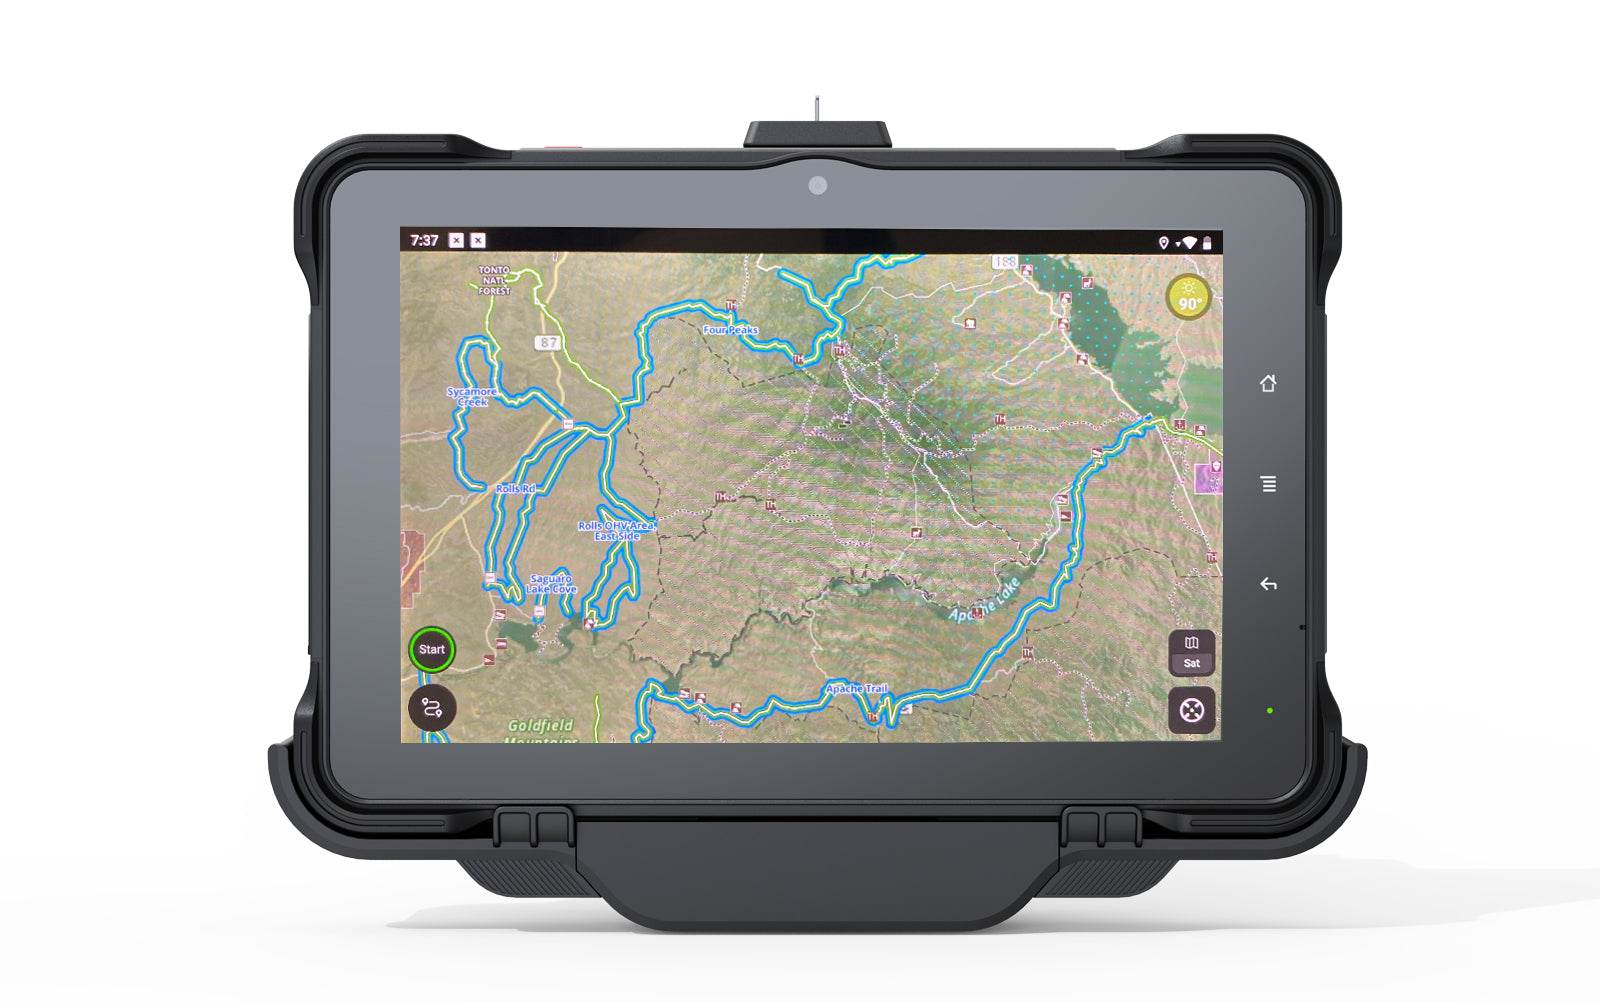 Shinkan Poleret Mystisk Sasquatch 10” Android Rugged Off-Road Vehicle GPS Tablet with Docking